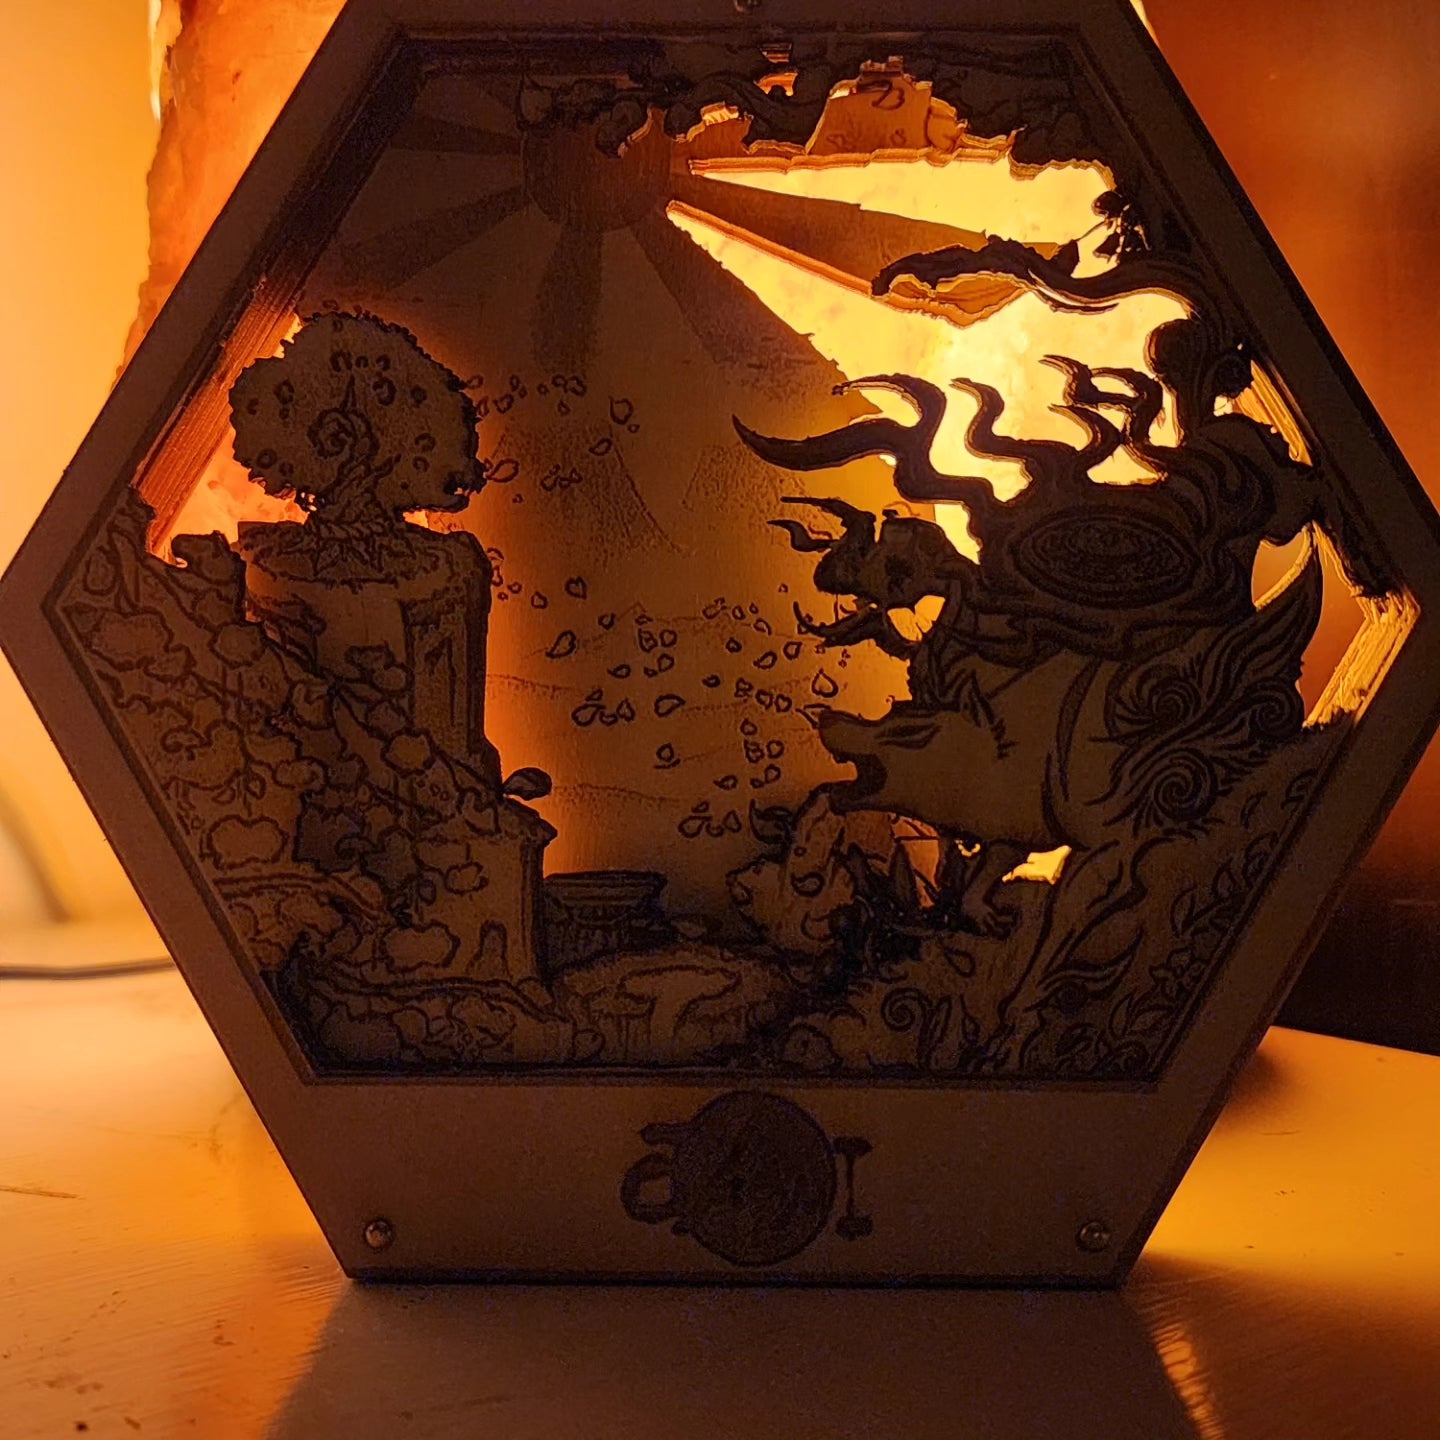 Okami Amaterasu - Rising Sun | 3D Wooden Artwork PlaqueArts | Unforgettable gift for gamers